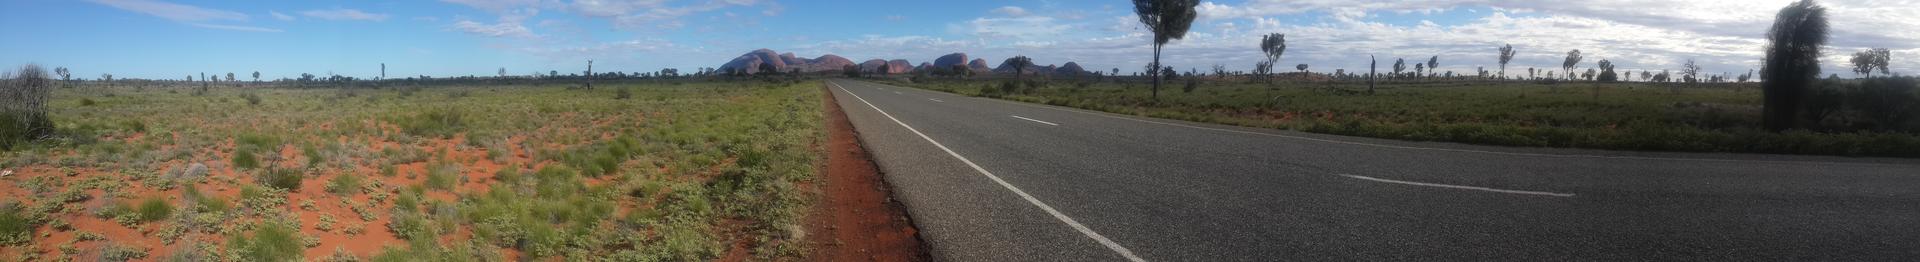 Day 4: The Kata Tjuta can be seen from Uluru even though the distance is more than 50km. Click to enlarge.